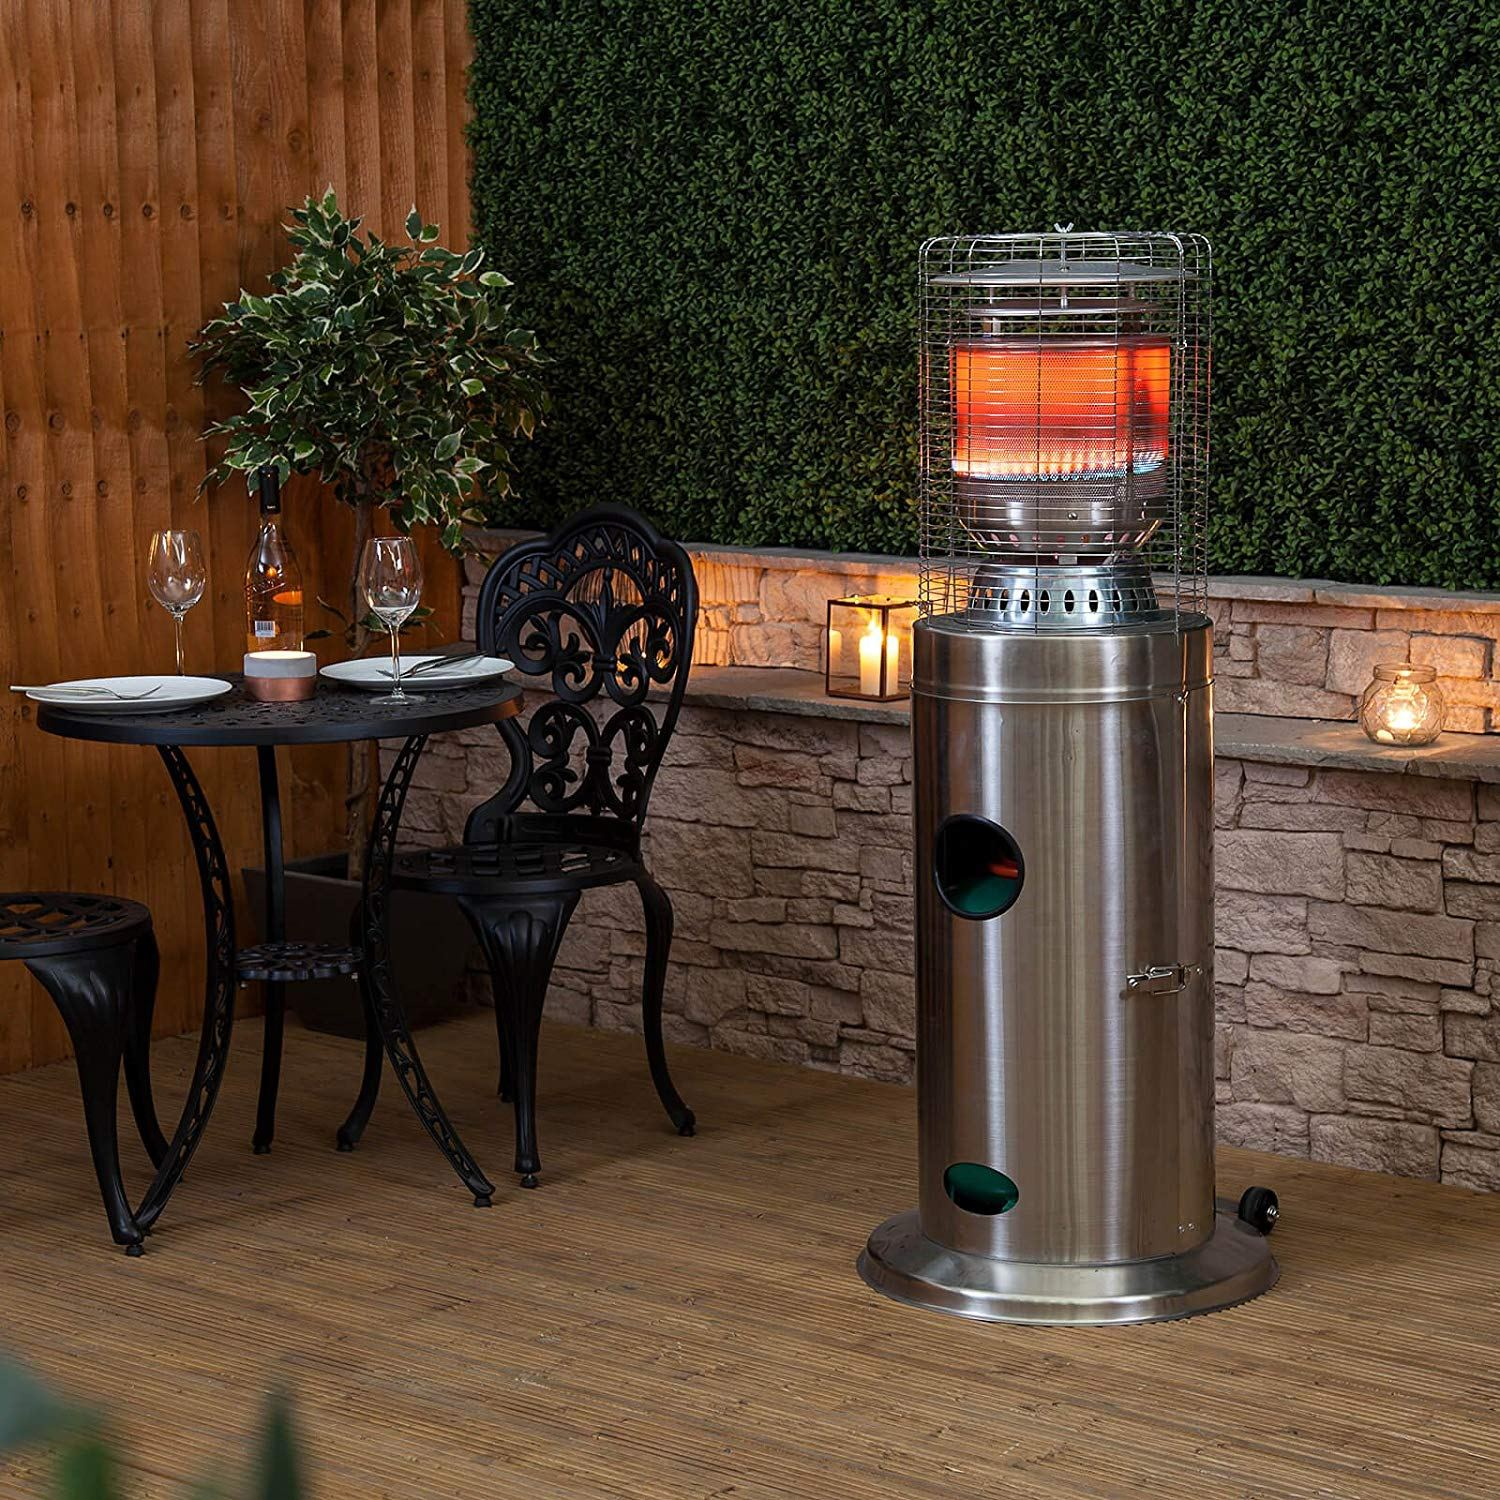 Best Patio Heaters 2019 The Sun Uk pertaining to dimensions 1500 X 1500